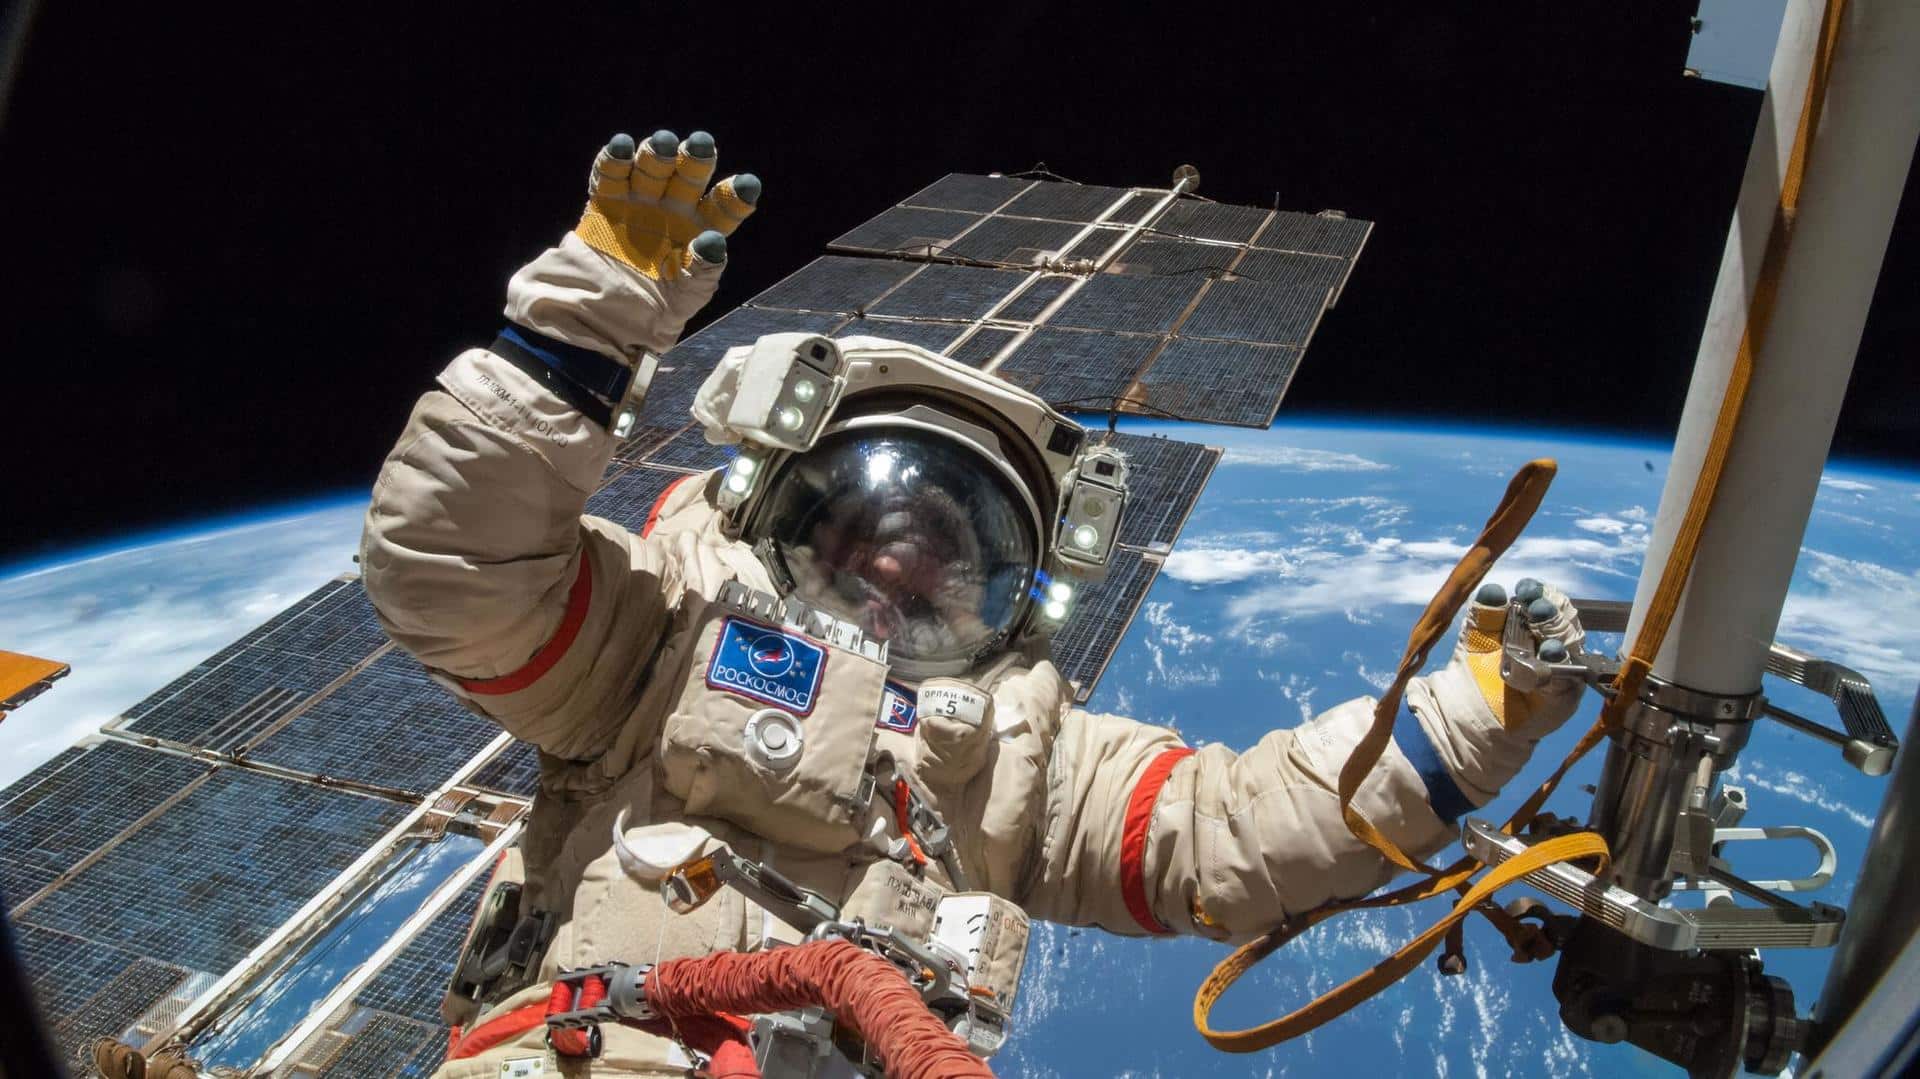 NASA astronauts to conduct spacewalk today: How to watch